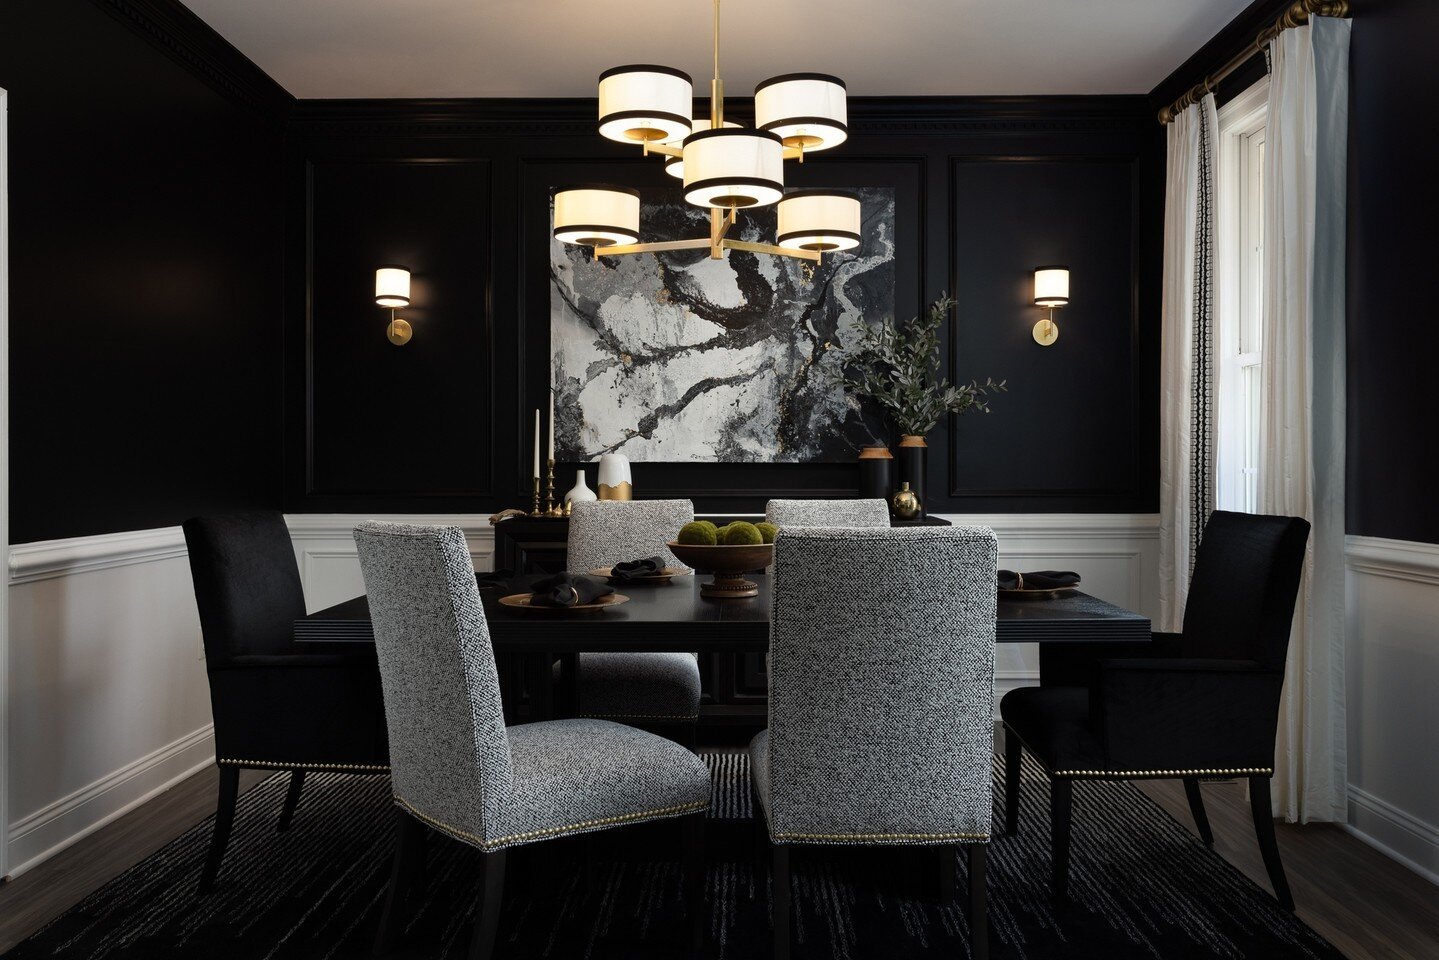 Check out the mood! So much drama in this dining room! Black walls and velvet chairs create a luxe experience.⁠
⁠
Photographer: @christykosnicphotography⁠
Designer: @2navylaneinteriors⁠
⁠
#diningroomdesign #abstractart